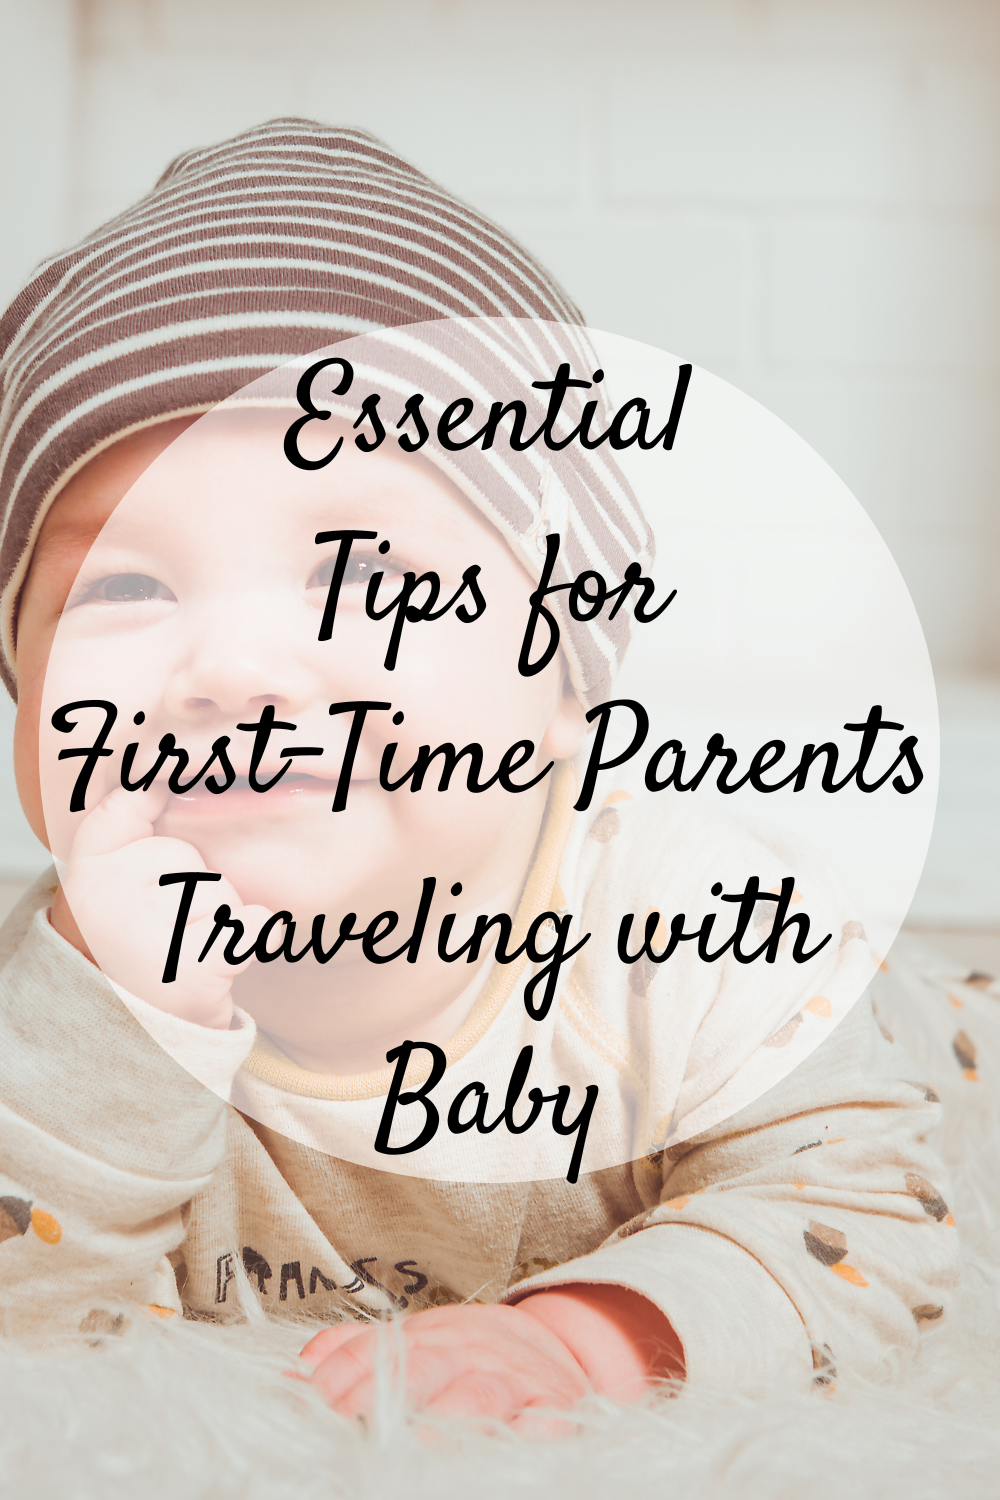 Essential Tips for First-Time Parents Traveling with Baby